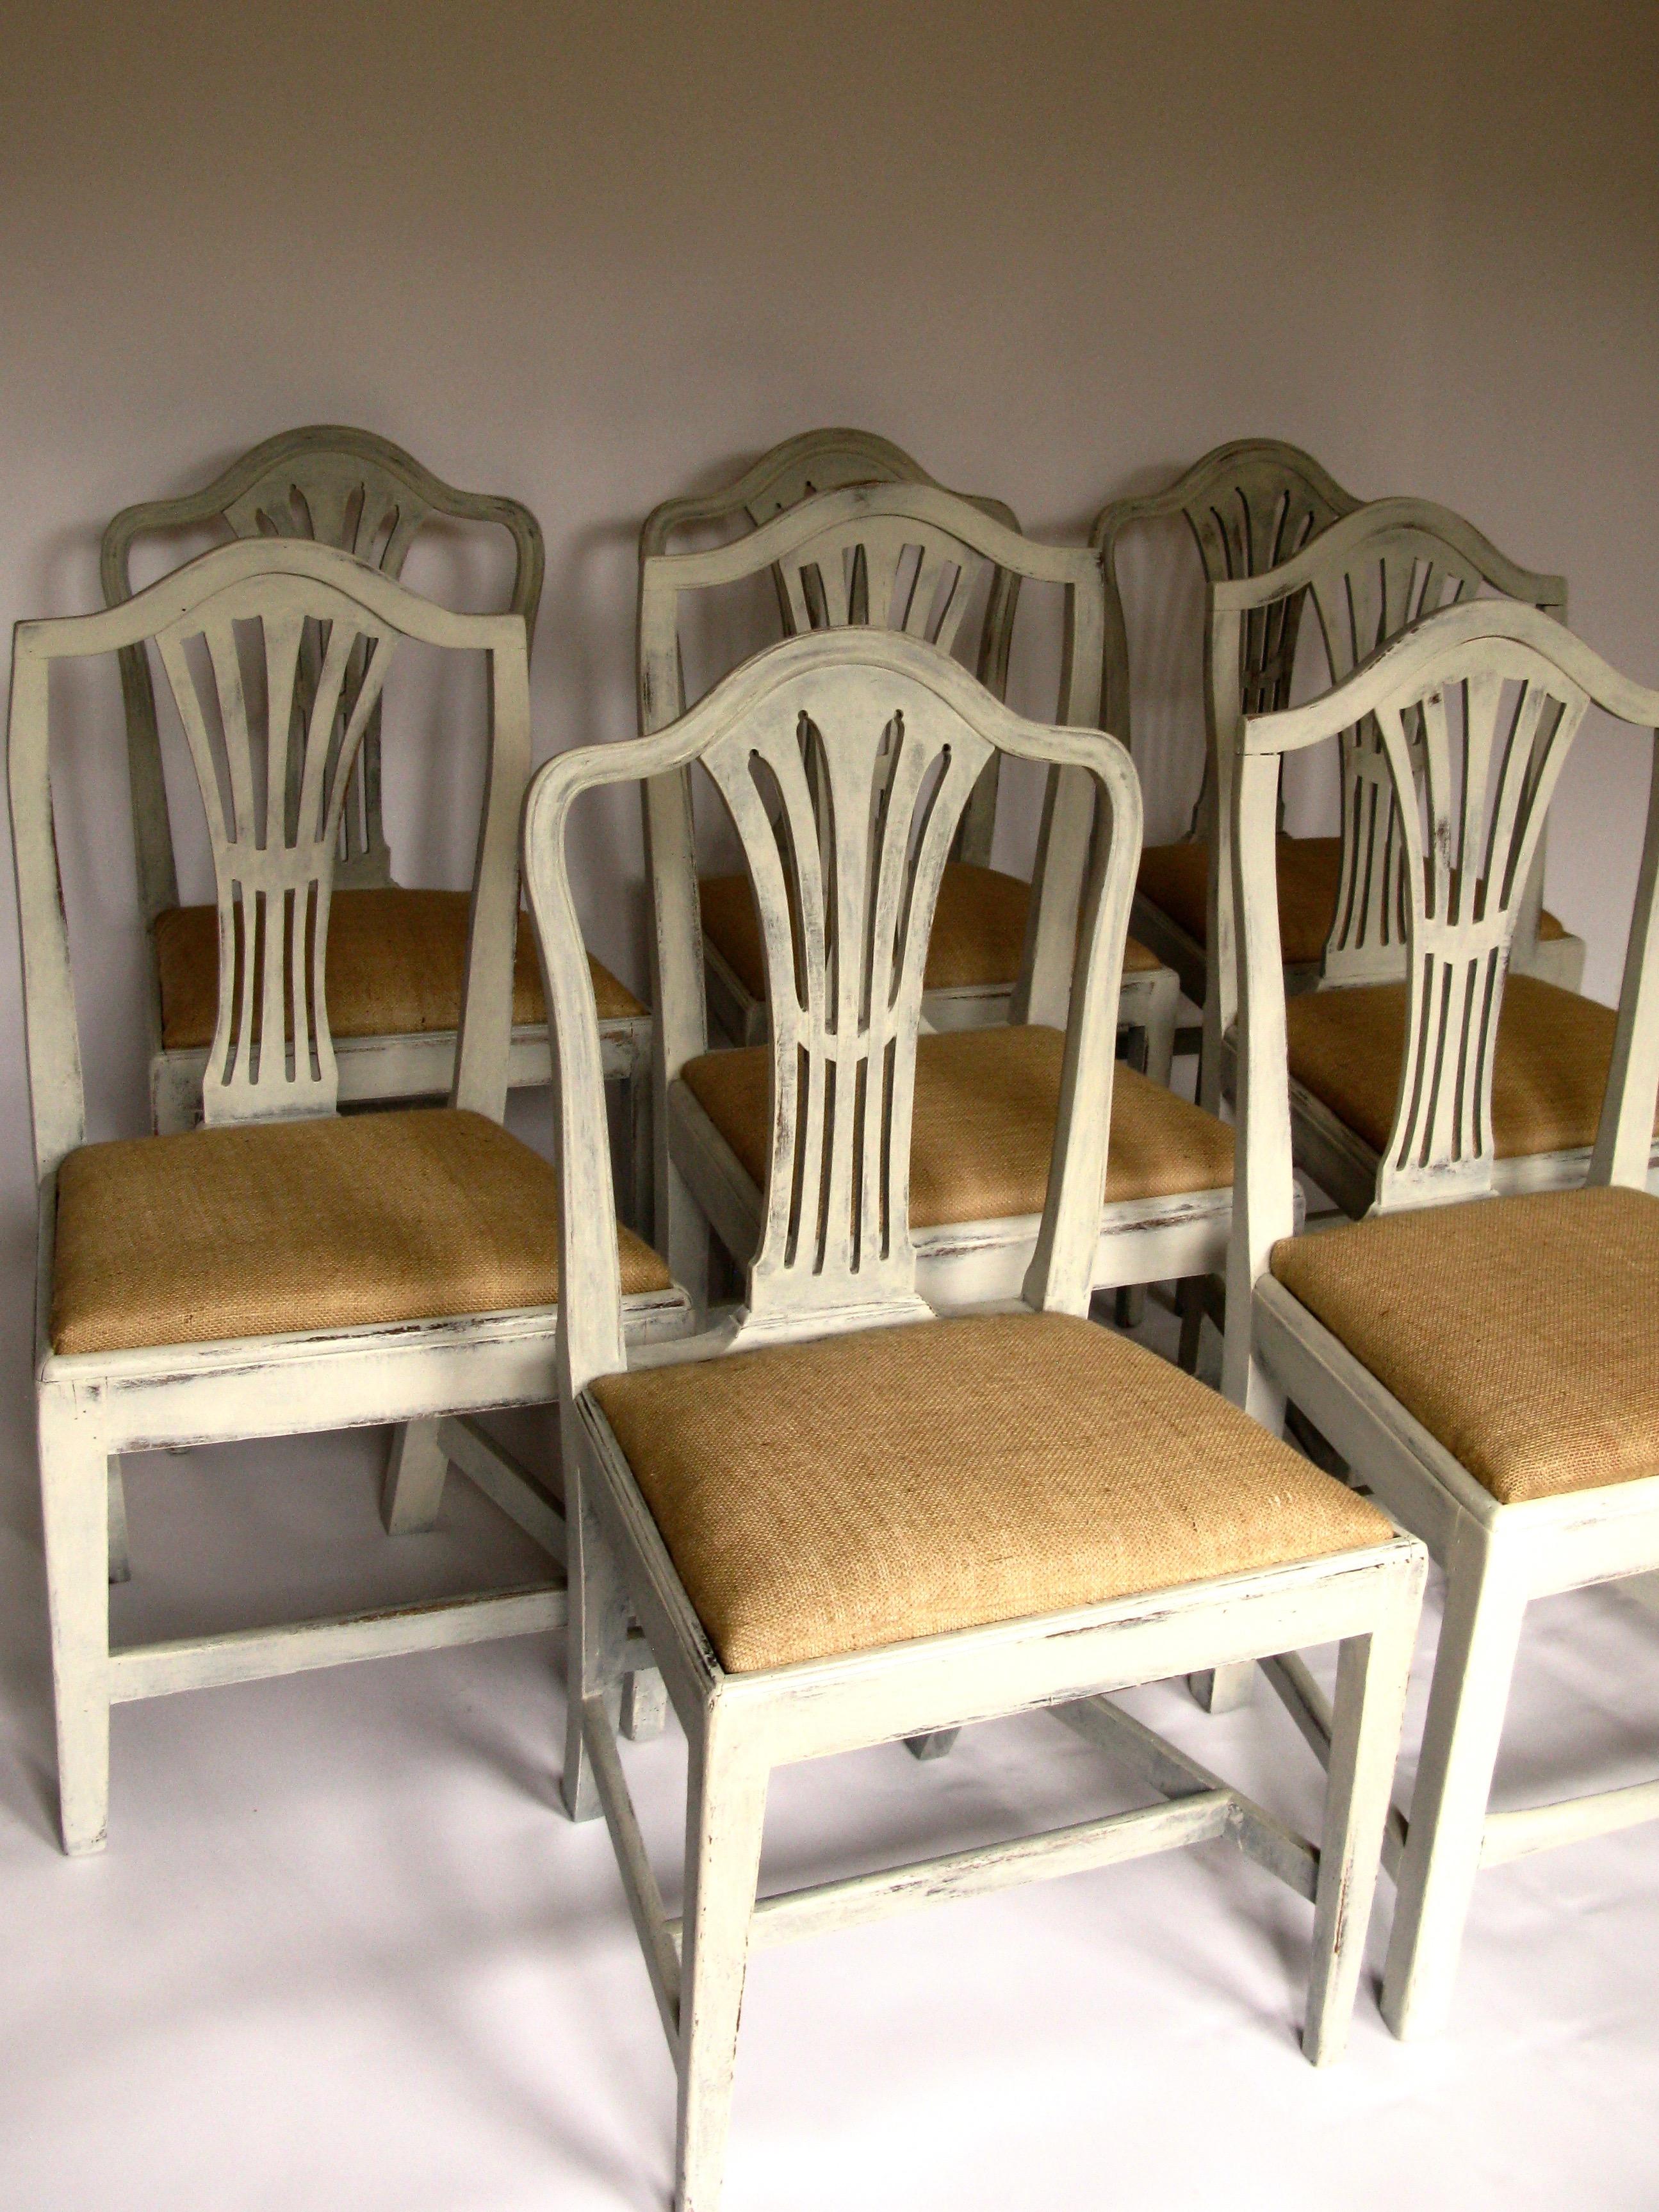 Lovely set of 8 Harlequin Antique chairs, Hepplewhite period, early 19th century, with new restored seats with jute, origin United Kingdom
These chairs are in perfect condition and look marvellous on dining or kitchen table. (painted)
Measures: Seat